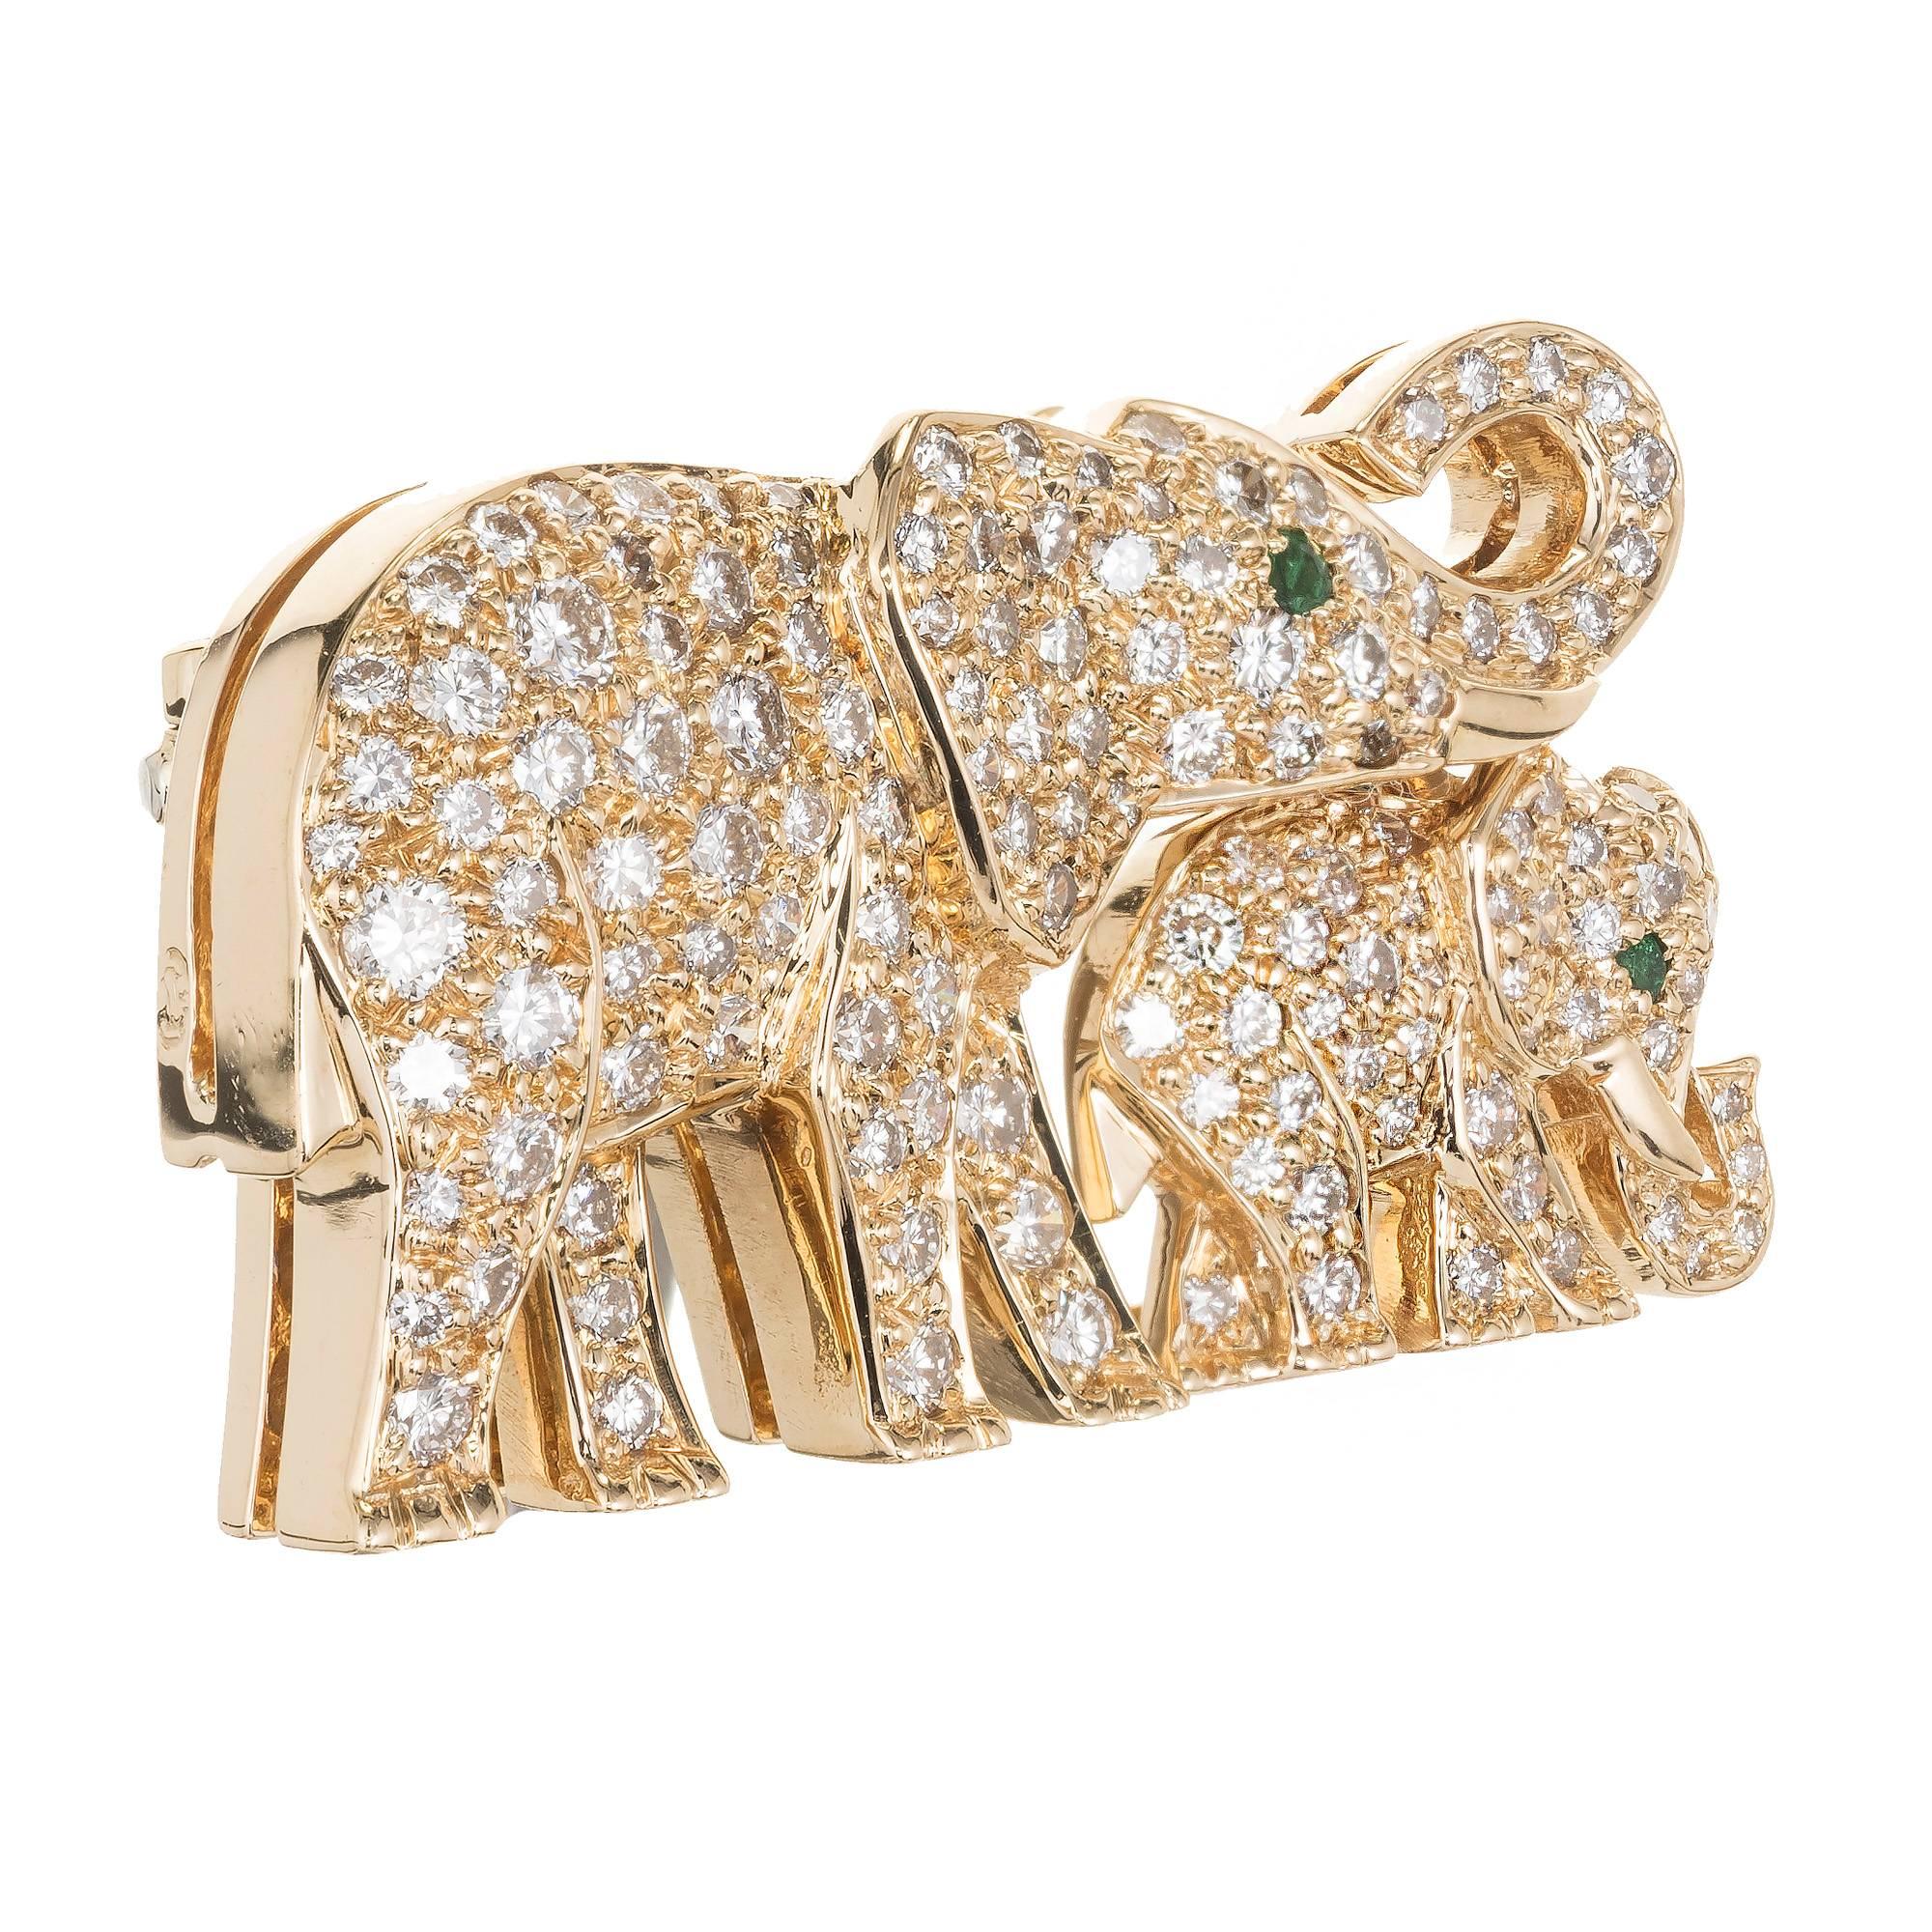 Cartier  Mother and Child Elephant Brooch pin in solid 18k yellow gold with pave diamonds and genuine emerald eyes.

Approximately 129 round full cut diamonds FG-VS 1.20 carats
Two green emerald eyes VS-SI
Top to Bottom: 16.91mm or .66 inches
Width: